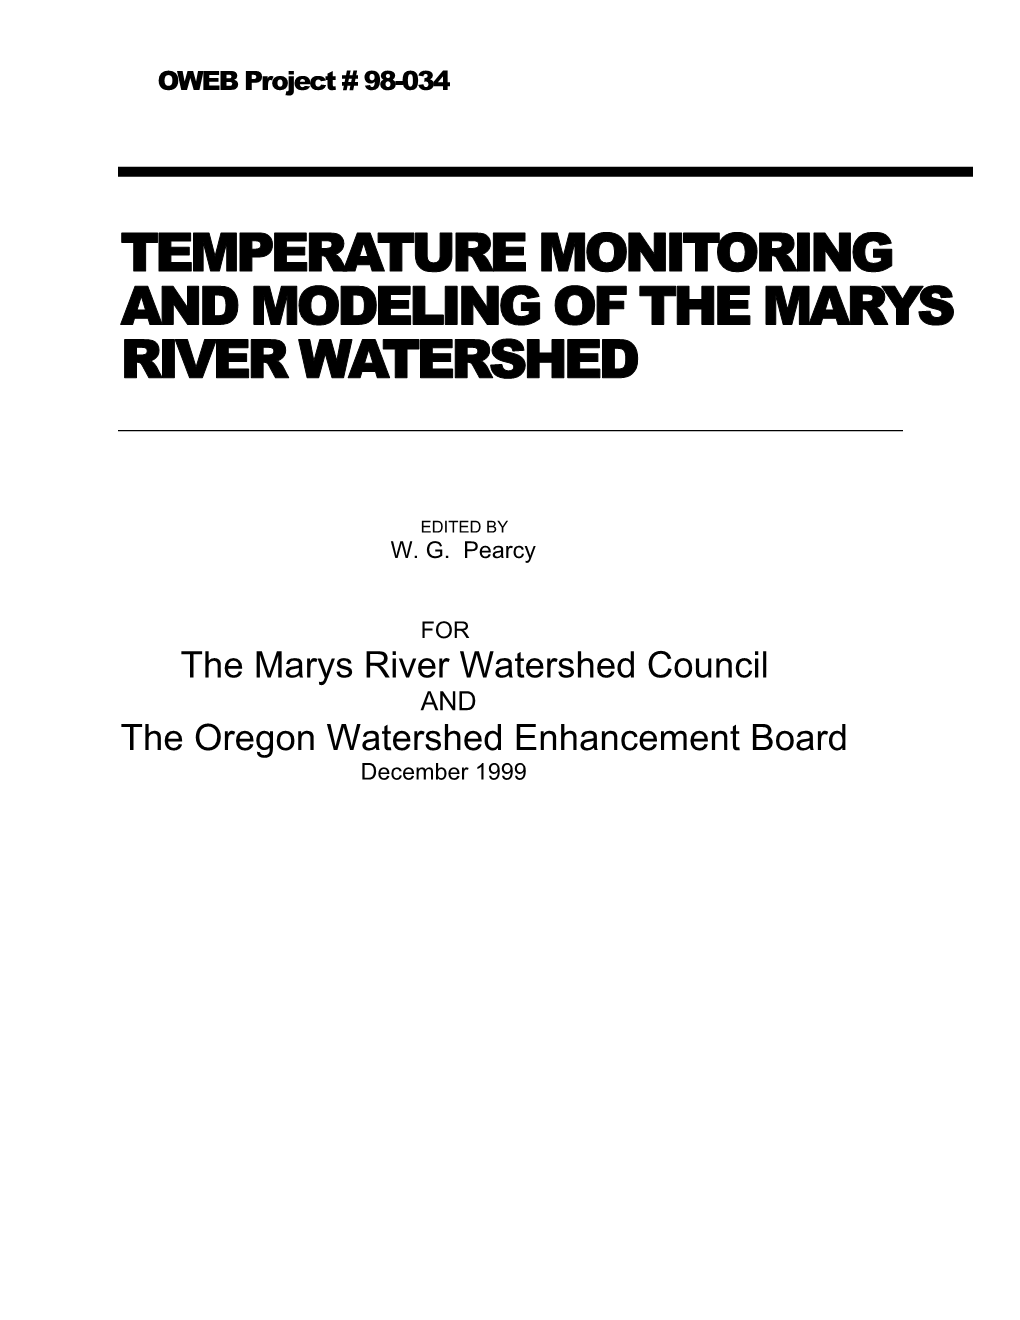 Temperature Monitoring and Modeling of the Marys River Watershed